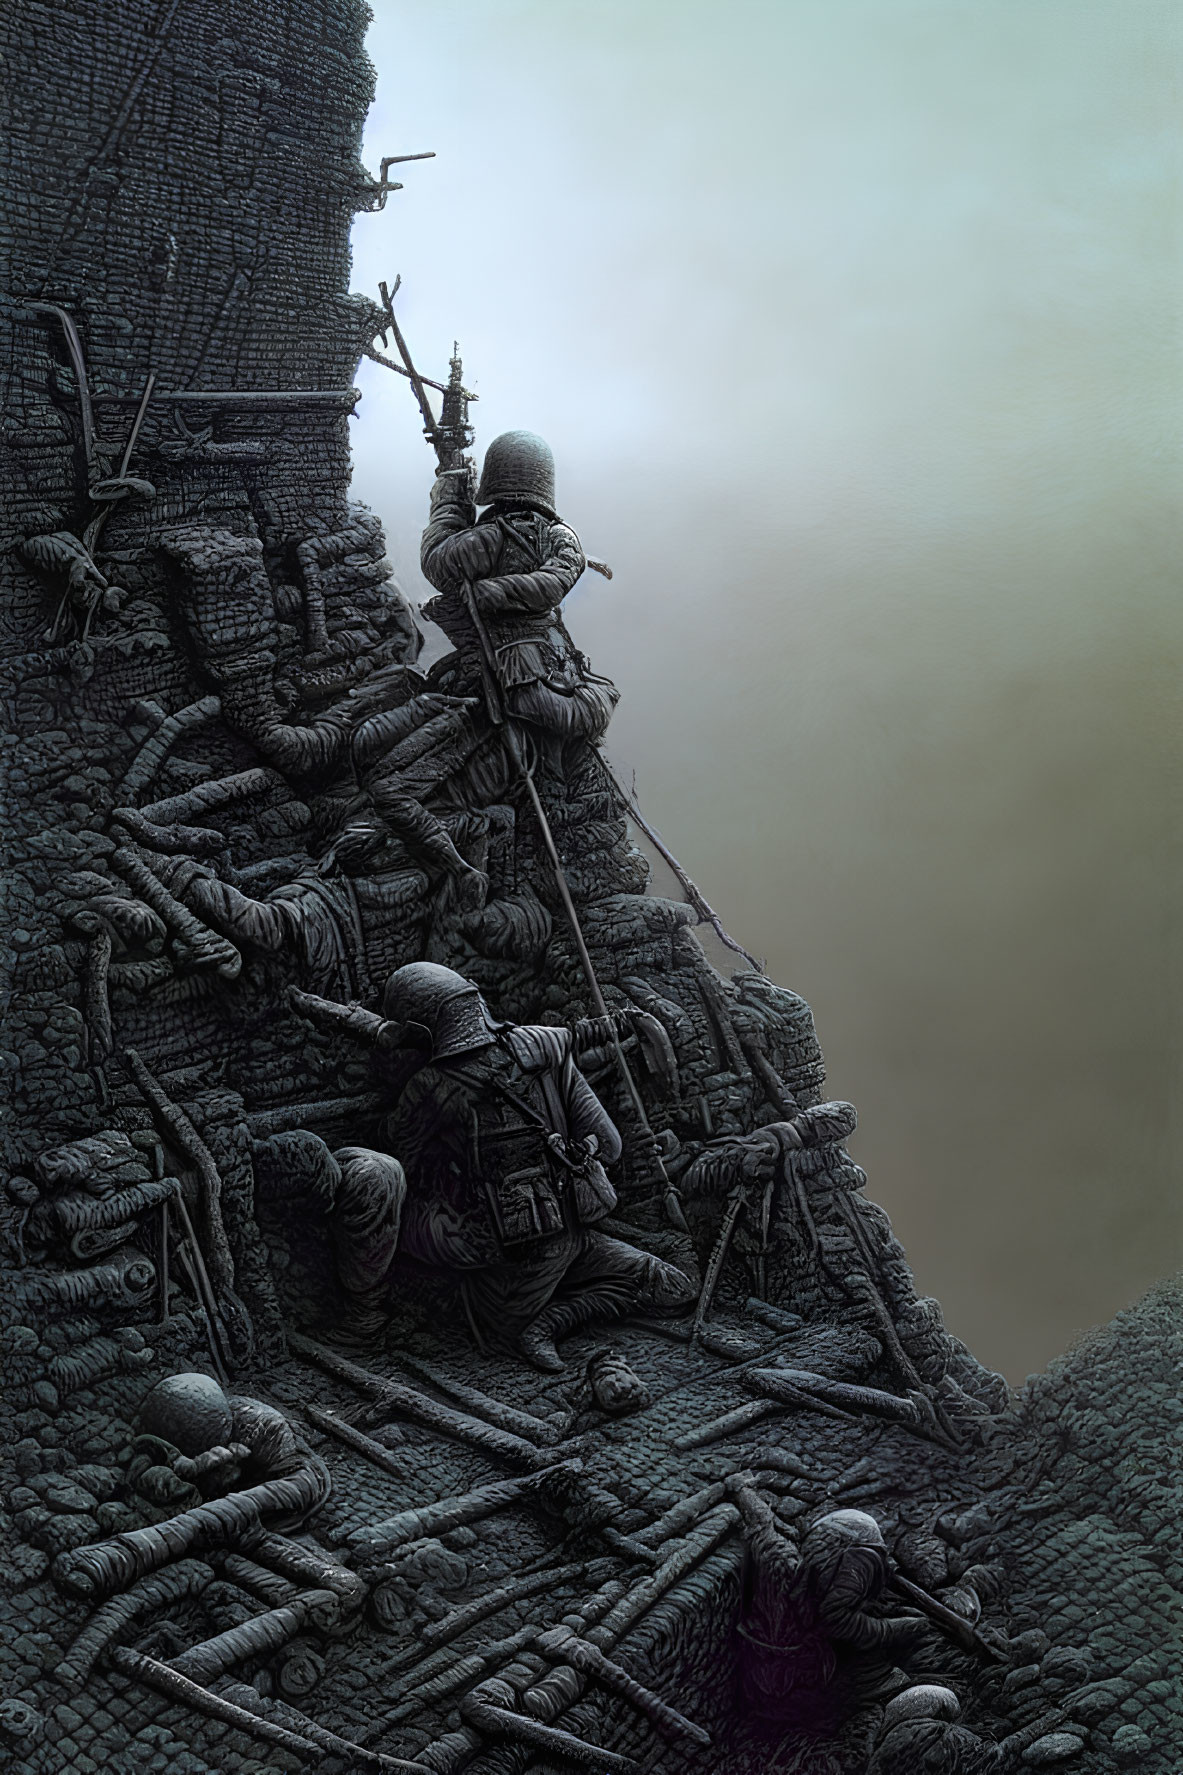 Vintage soldiers climbing rocky hill in foggy setting